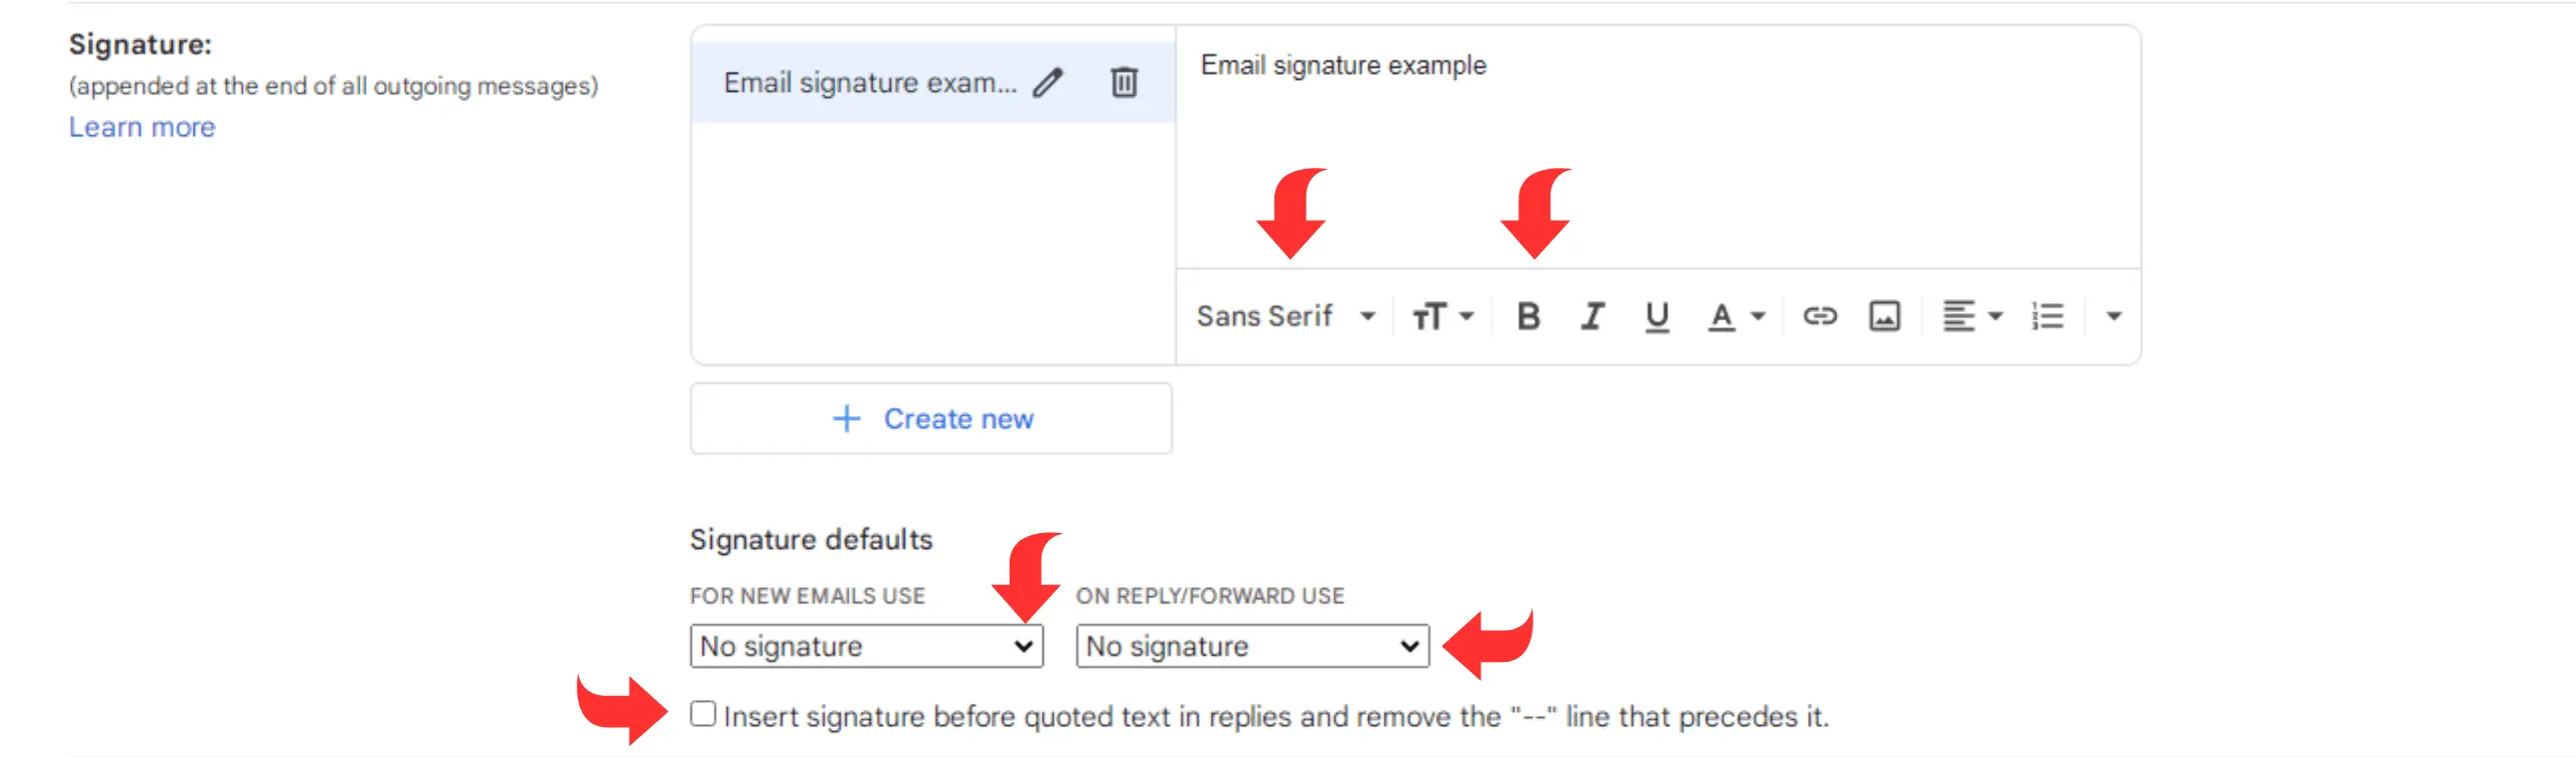 gmail-email-signature-settings